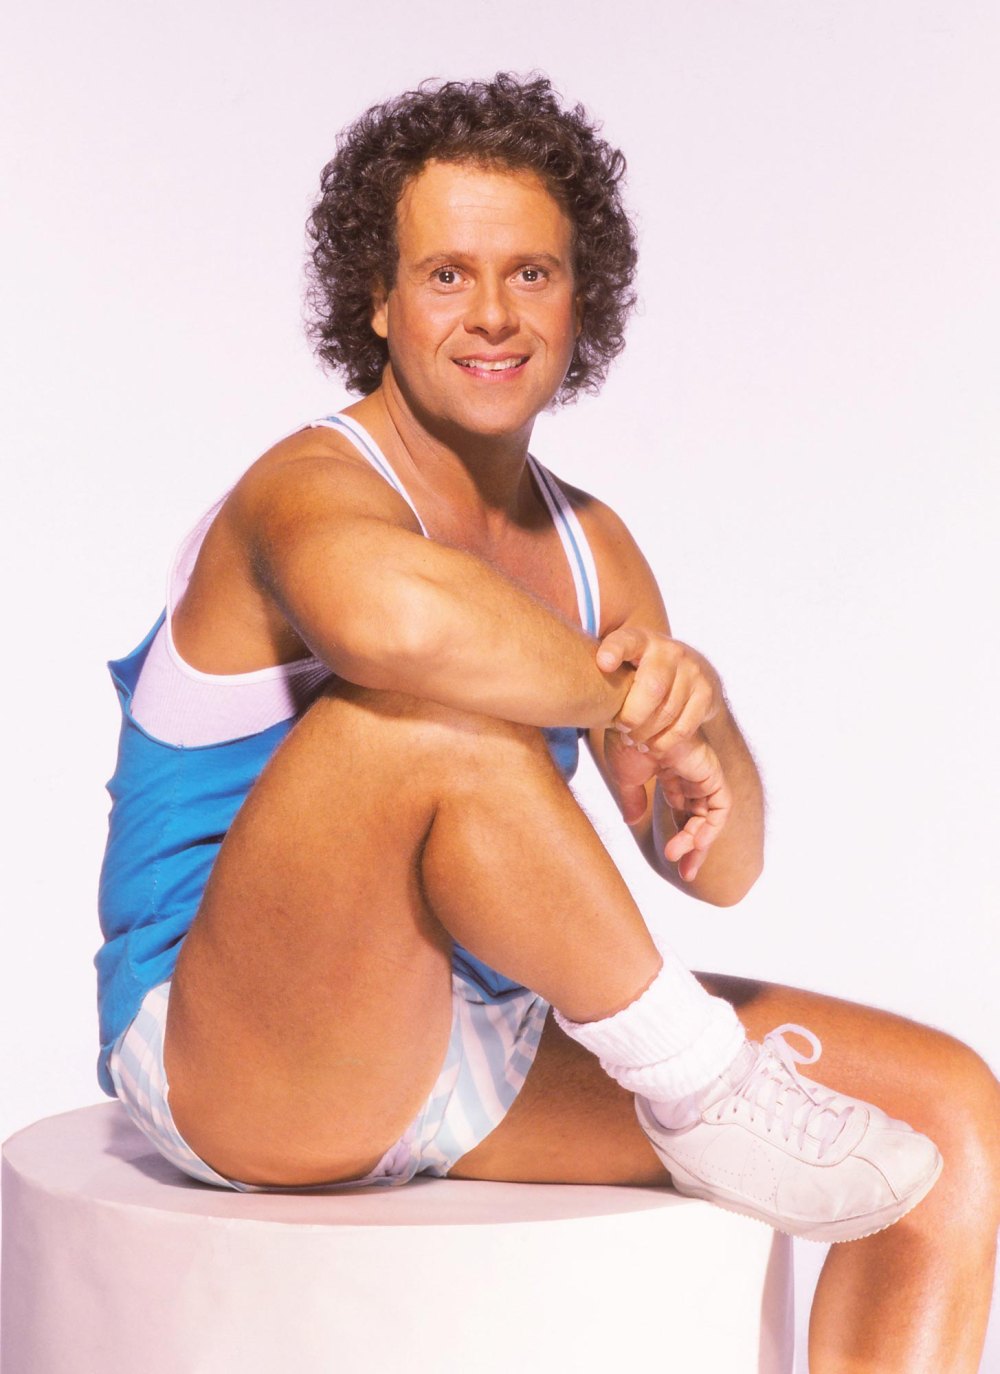 Pauly Shore cried all night over Richard Simmons' reaction to his role in the biopic